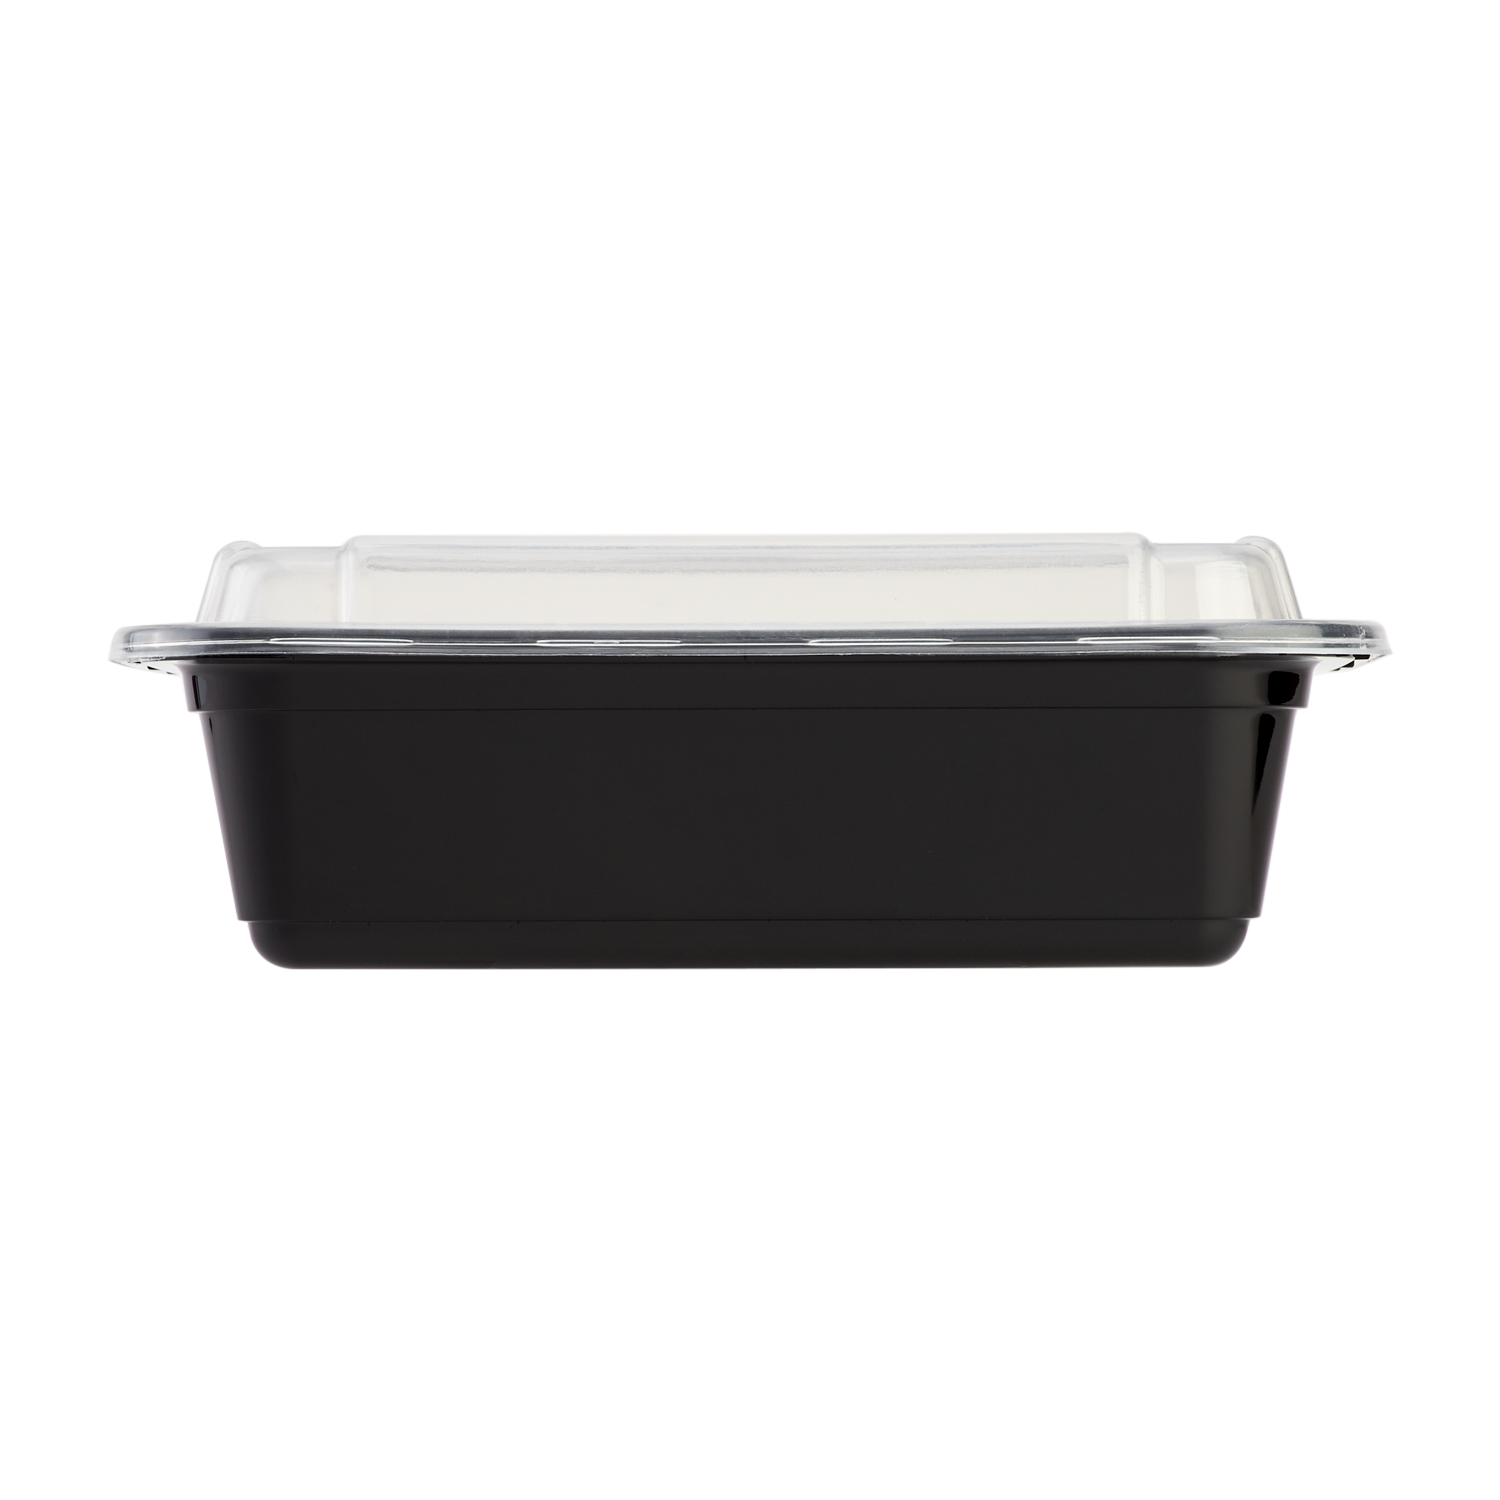 Restaurantware Asporto Microwavable To-Go Container - BPA Free PP  Rectangular Take Out Food Container with Clear Plastic Lid - Catering &  Takeout - 24